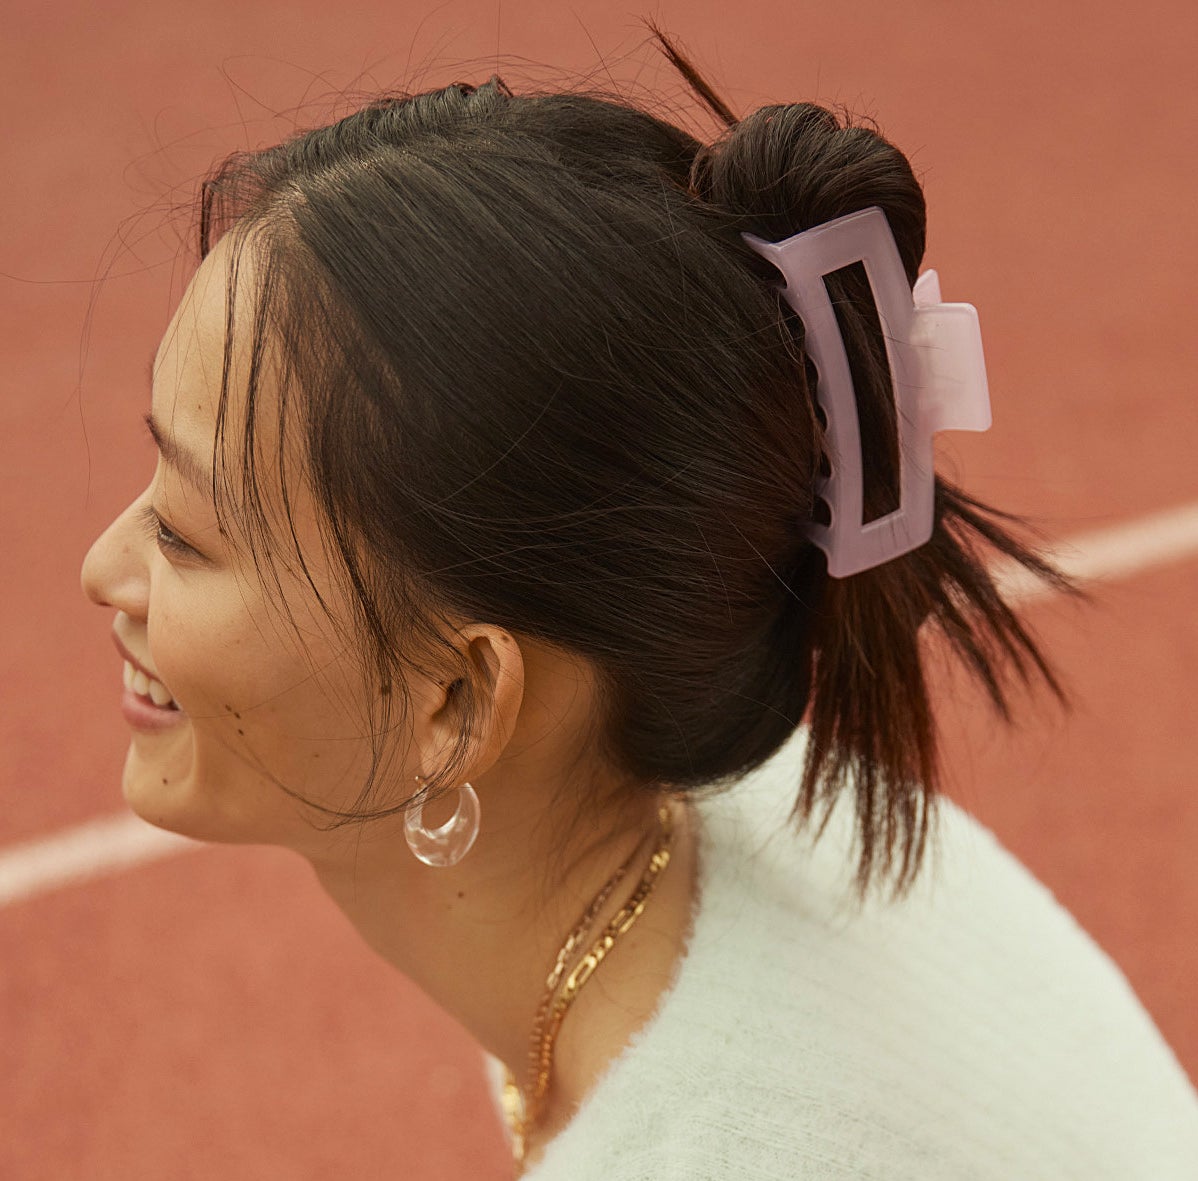 A person wearing a layered necklaces, a sweater, and the clip in their hair